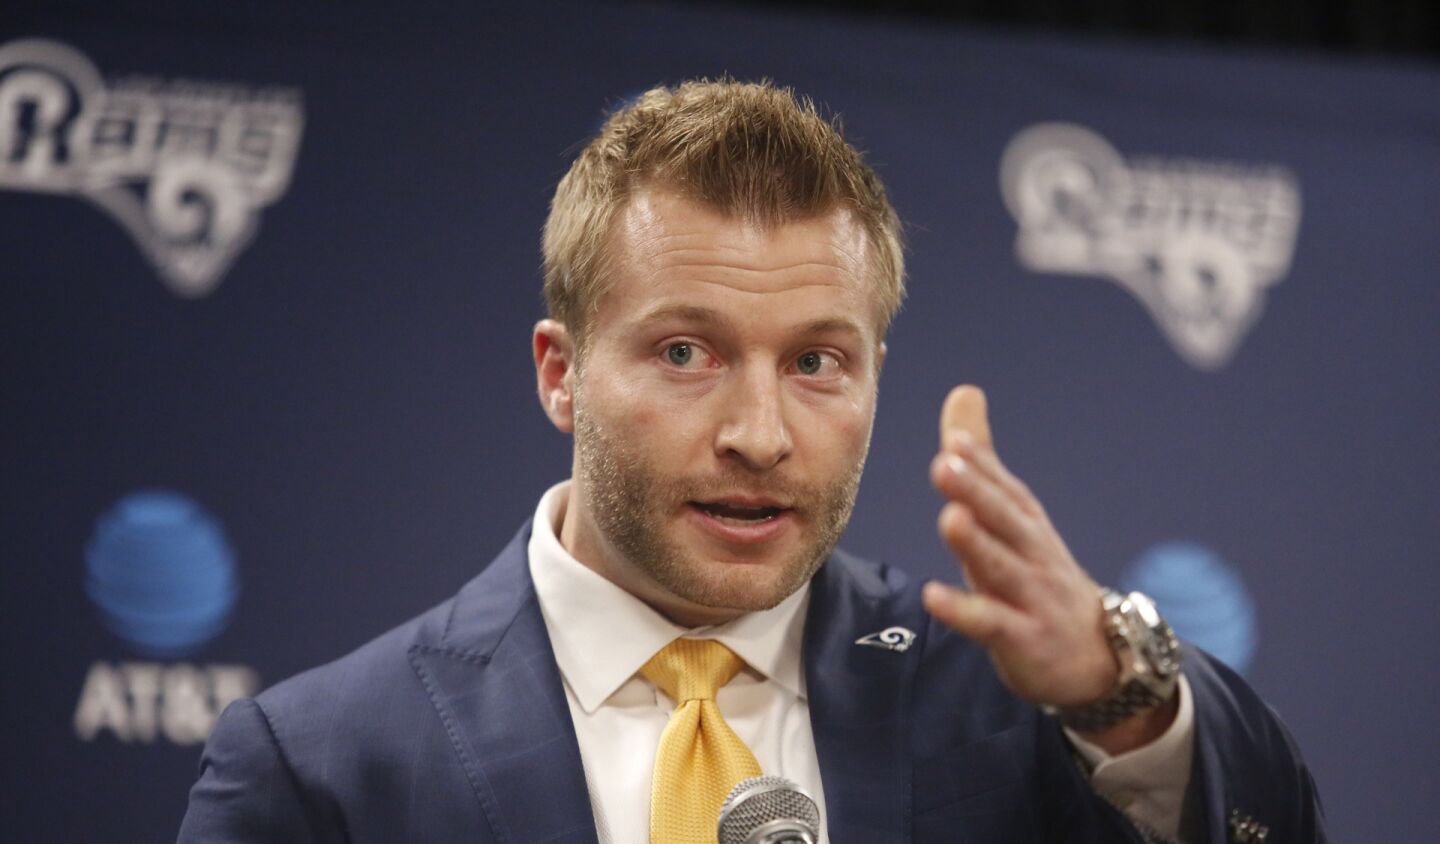 New Rams Coach Sean McVay answers a question during his introductory news conference.